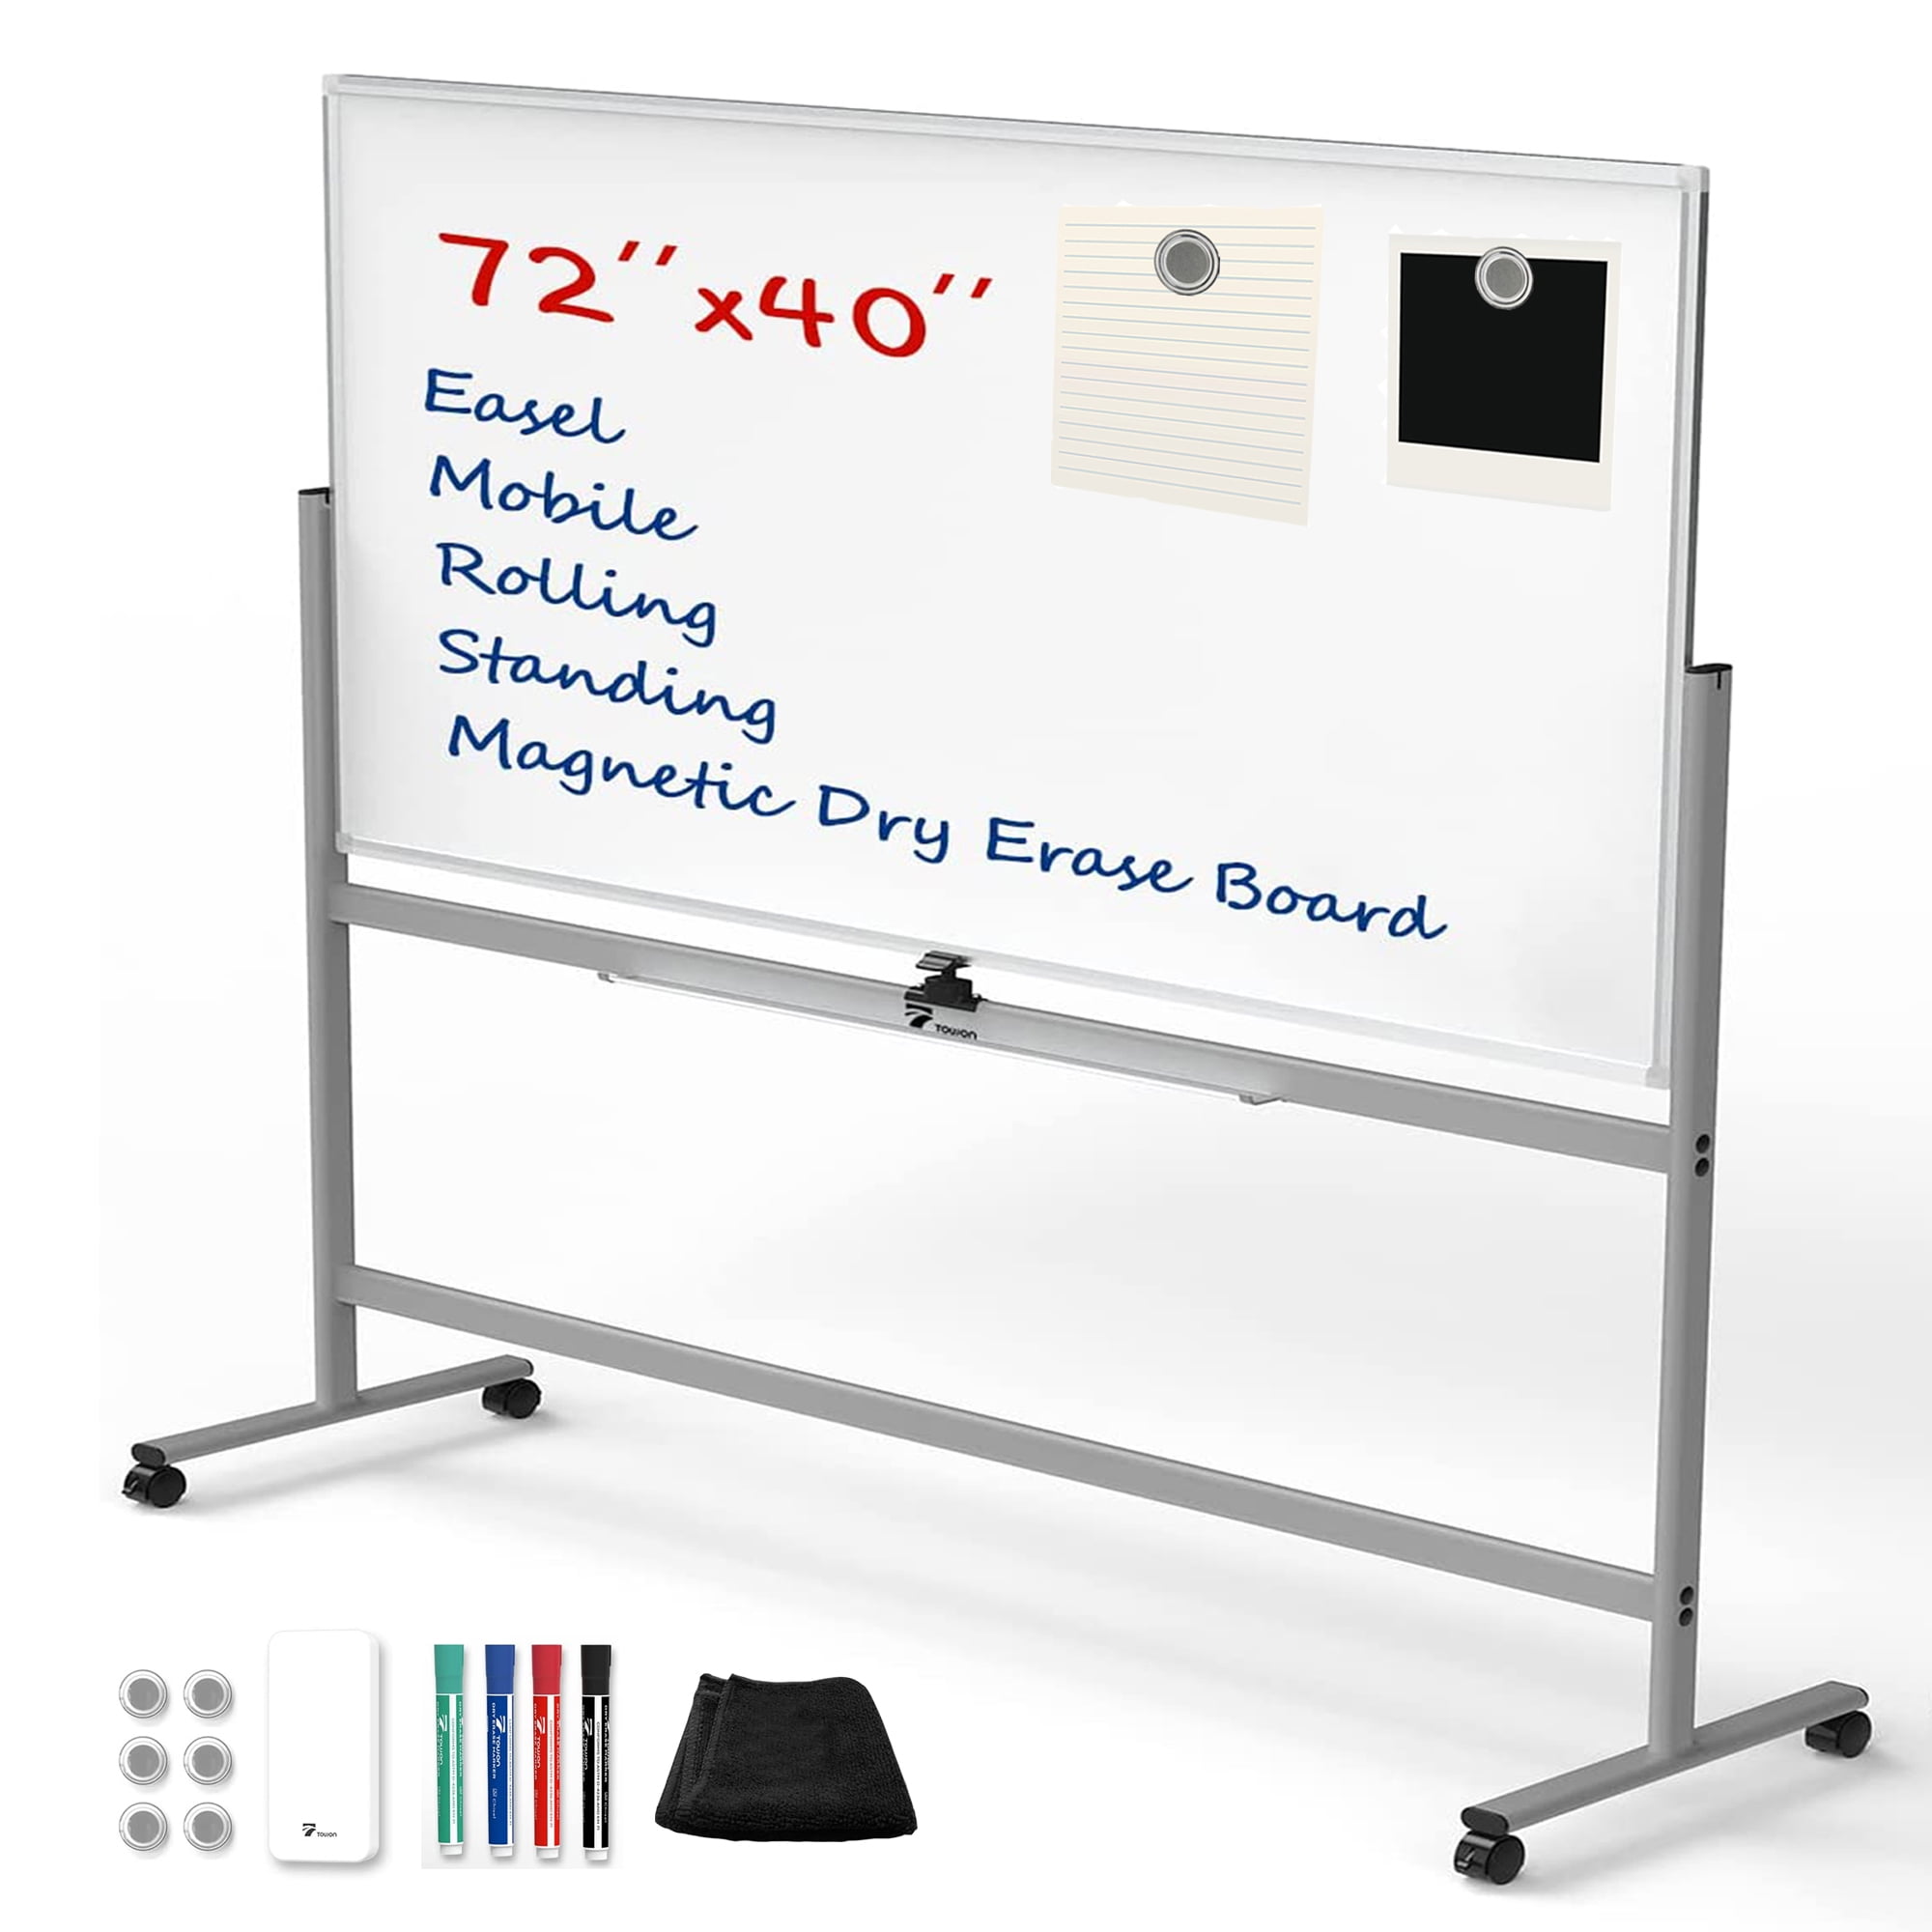 TOWON 4'x3' Magnetic Dry Erase White Board - Extra Large Clear